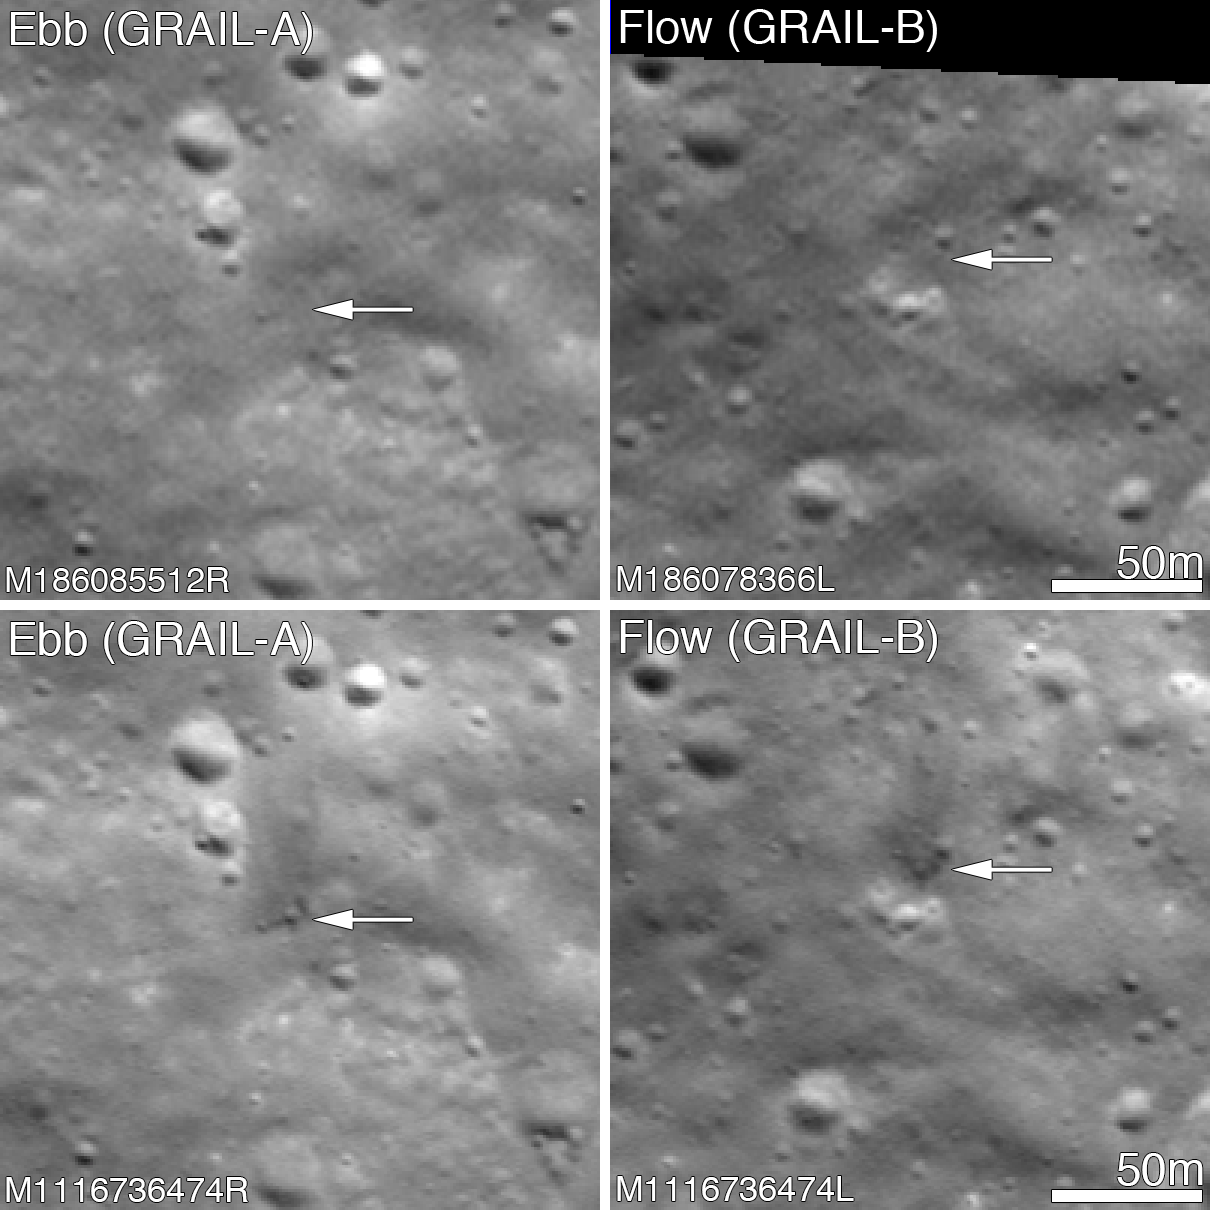 The upper images show the landscape before impact and the lower images show the craters and the dark ejecta.